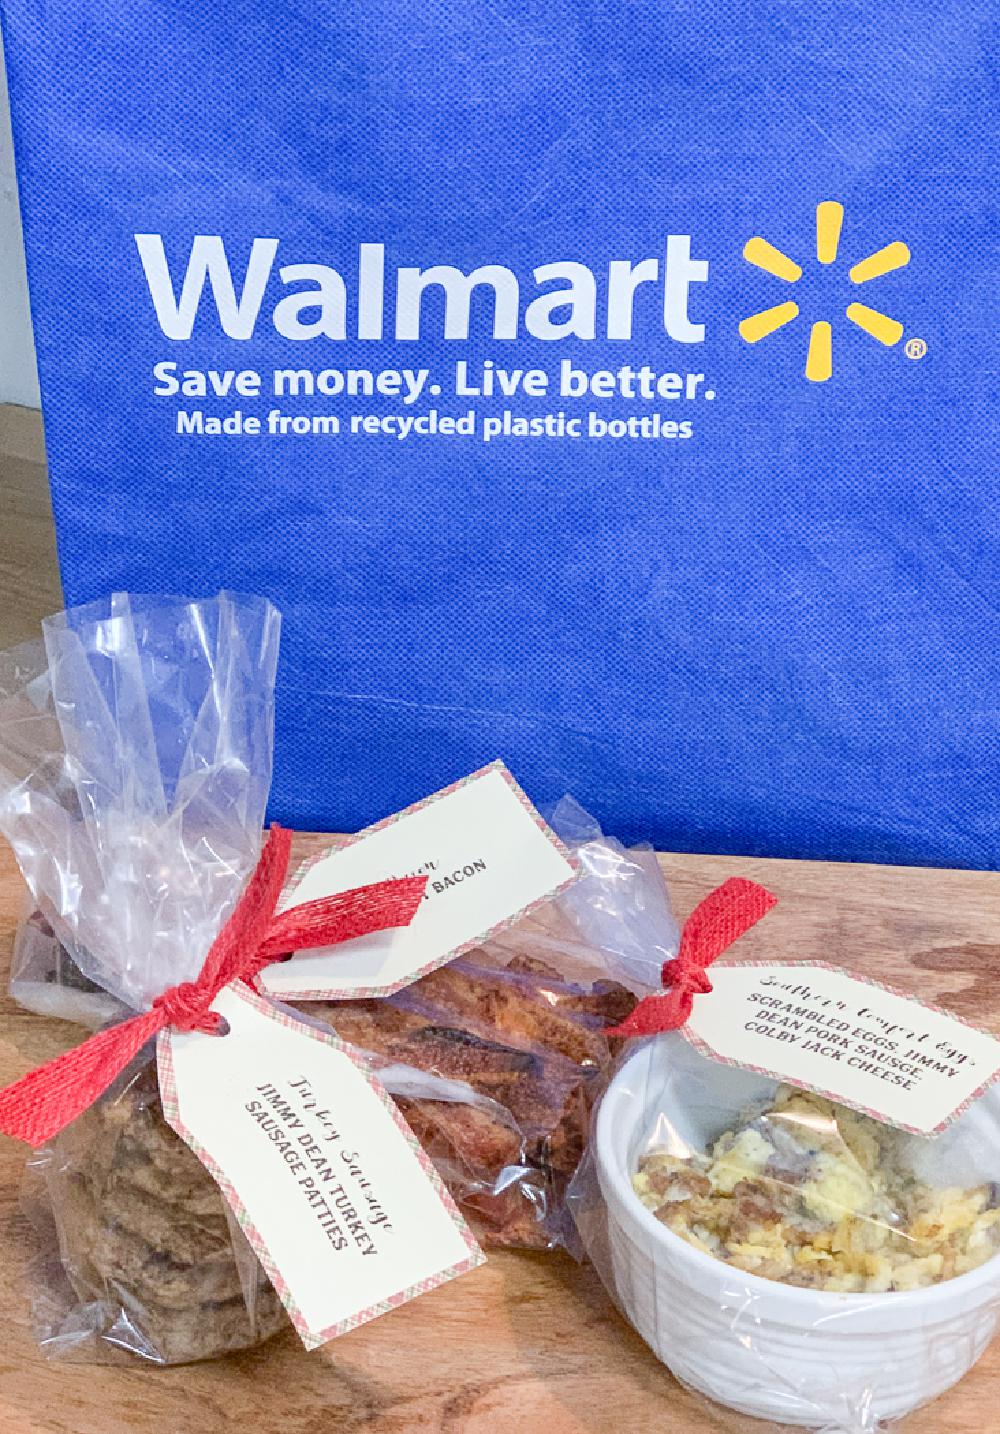 Cello Bags with Breakfast Food Walmart Bag